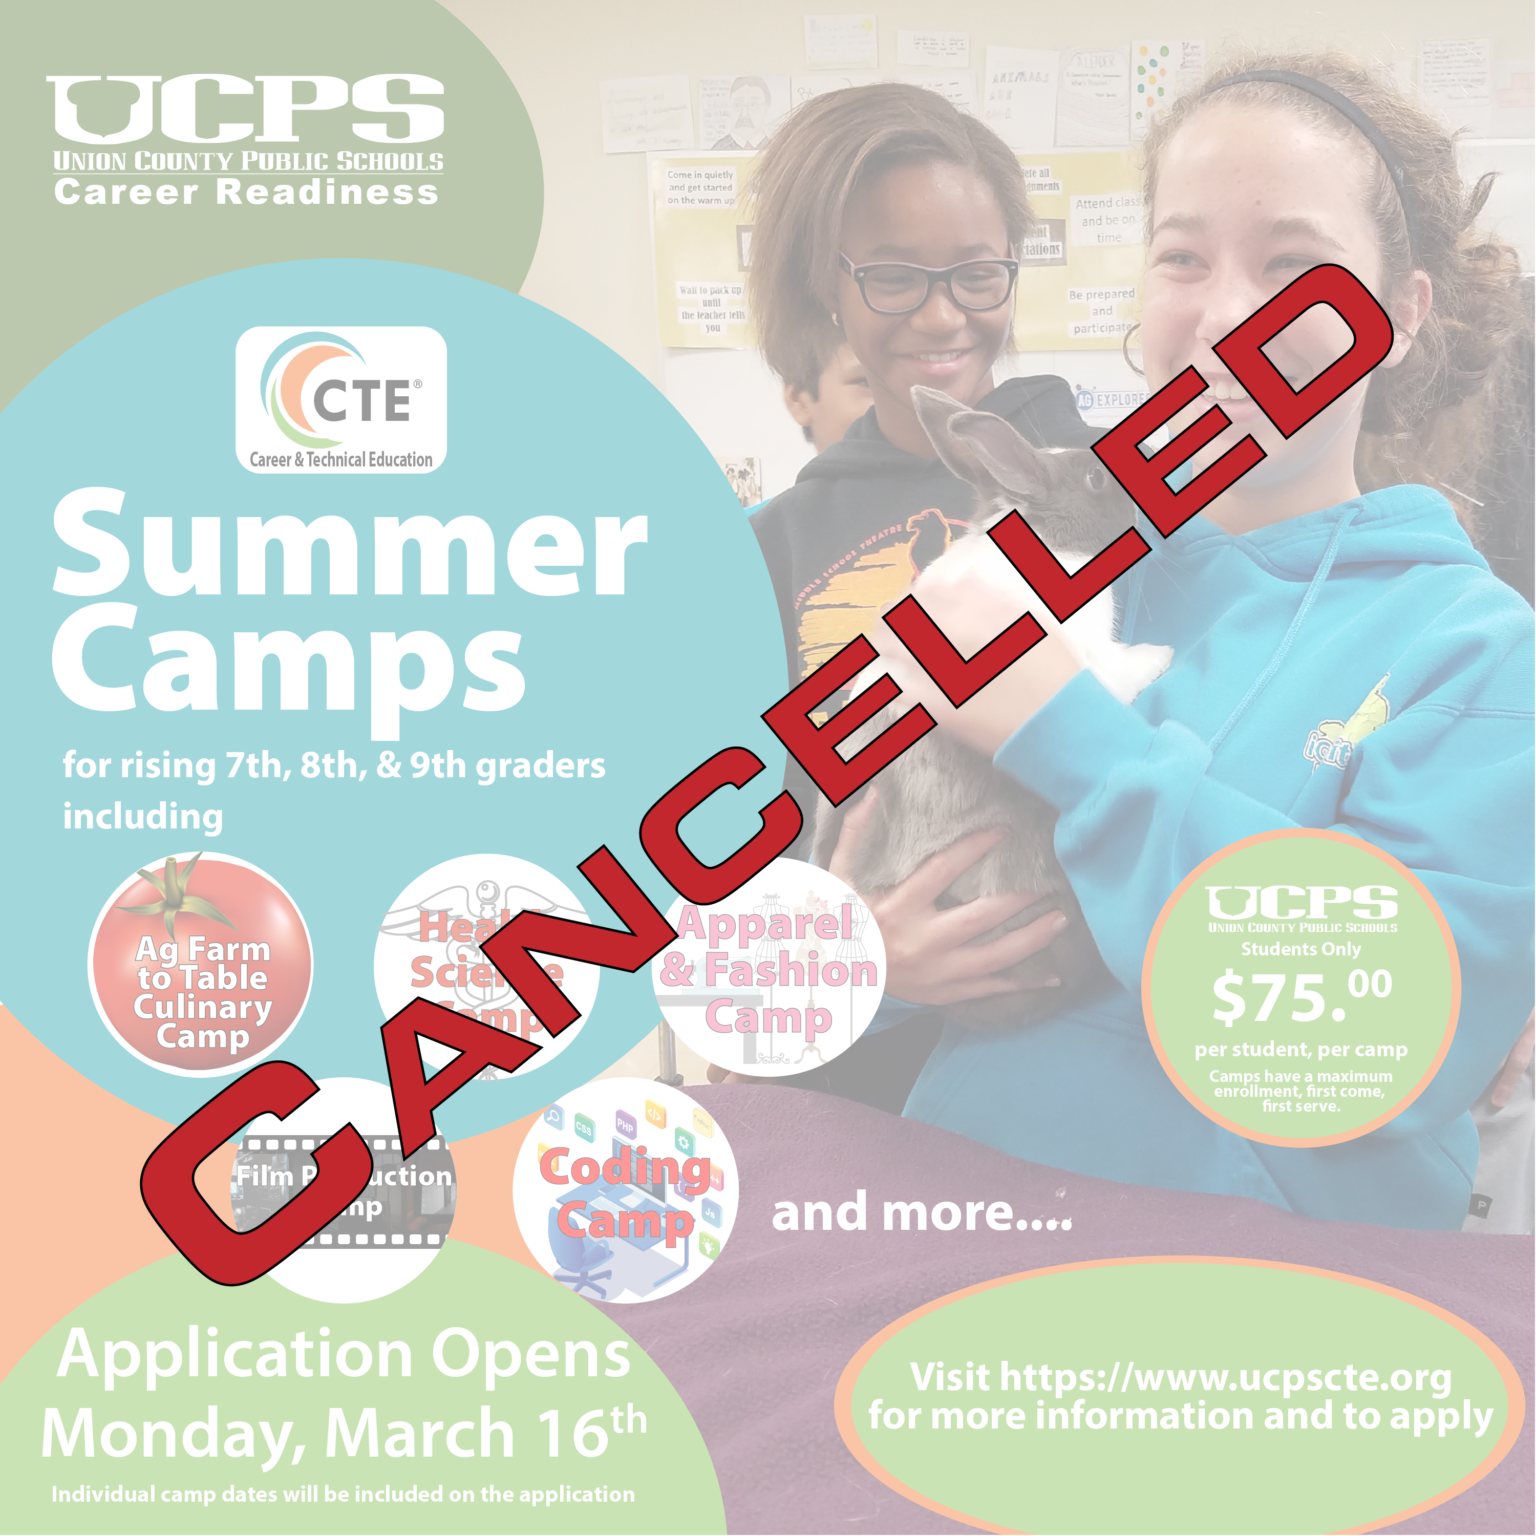 CTE Summer Camps for 2020 have been cancelled Union County Public